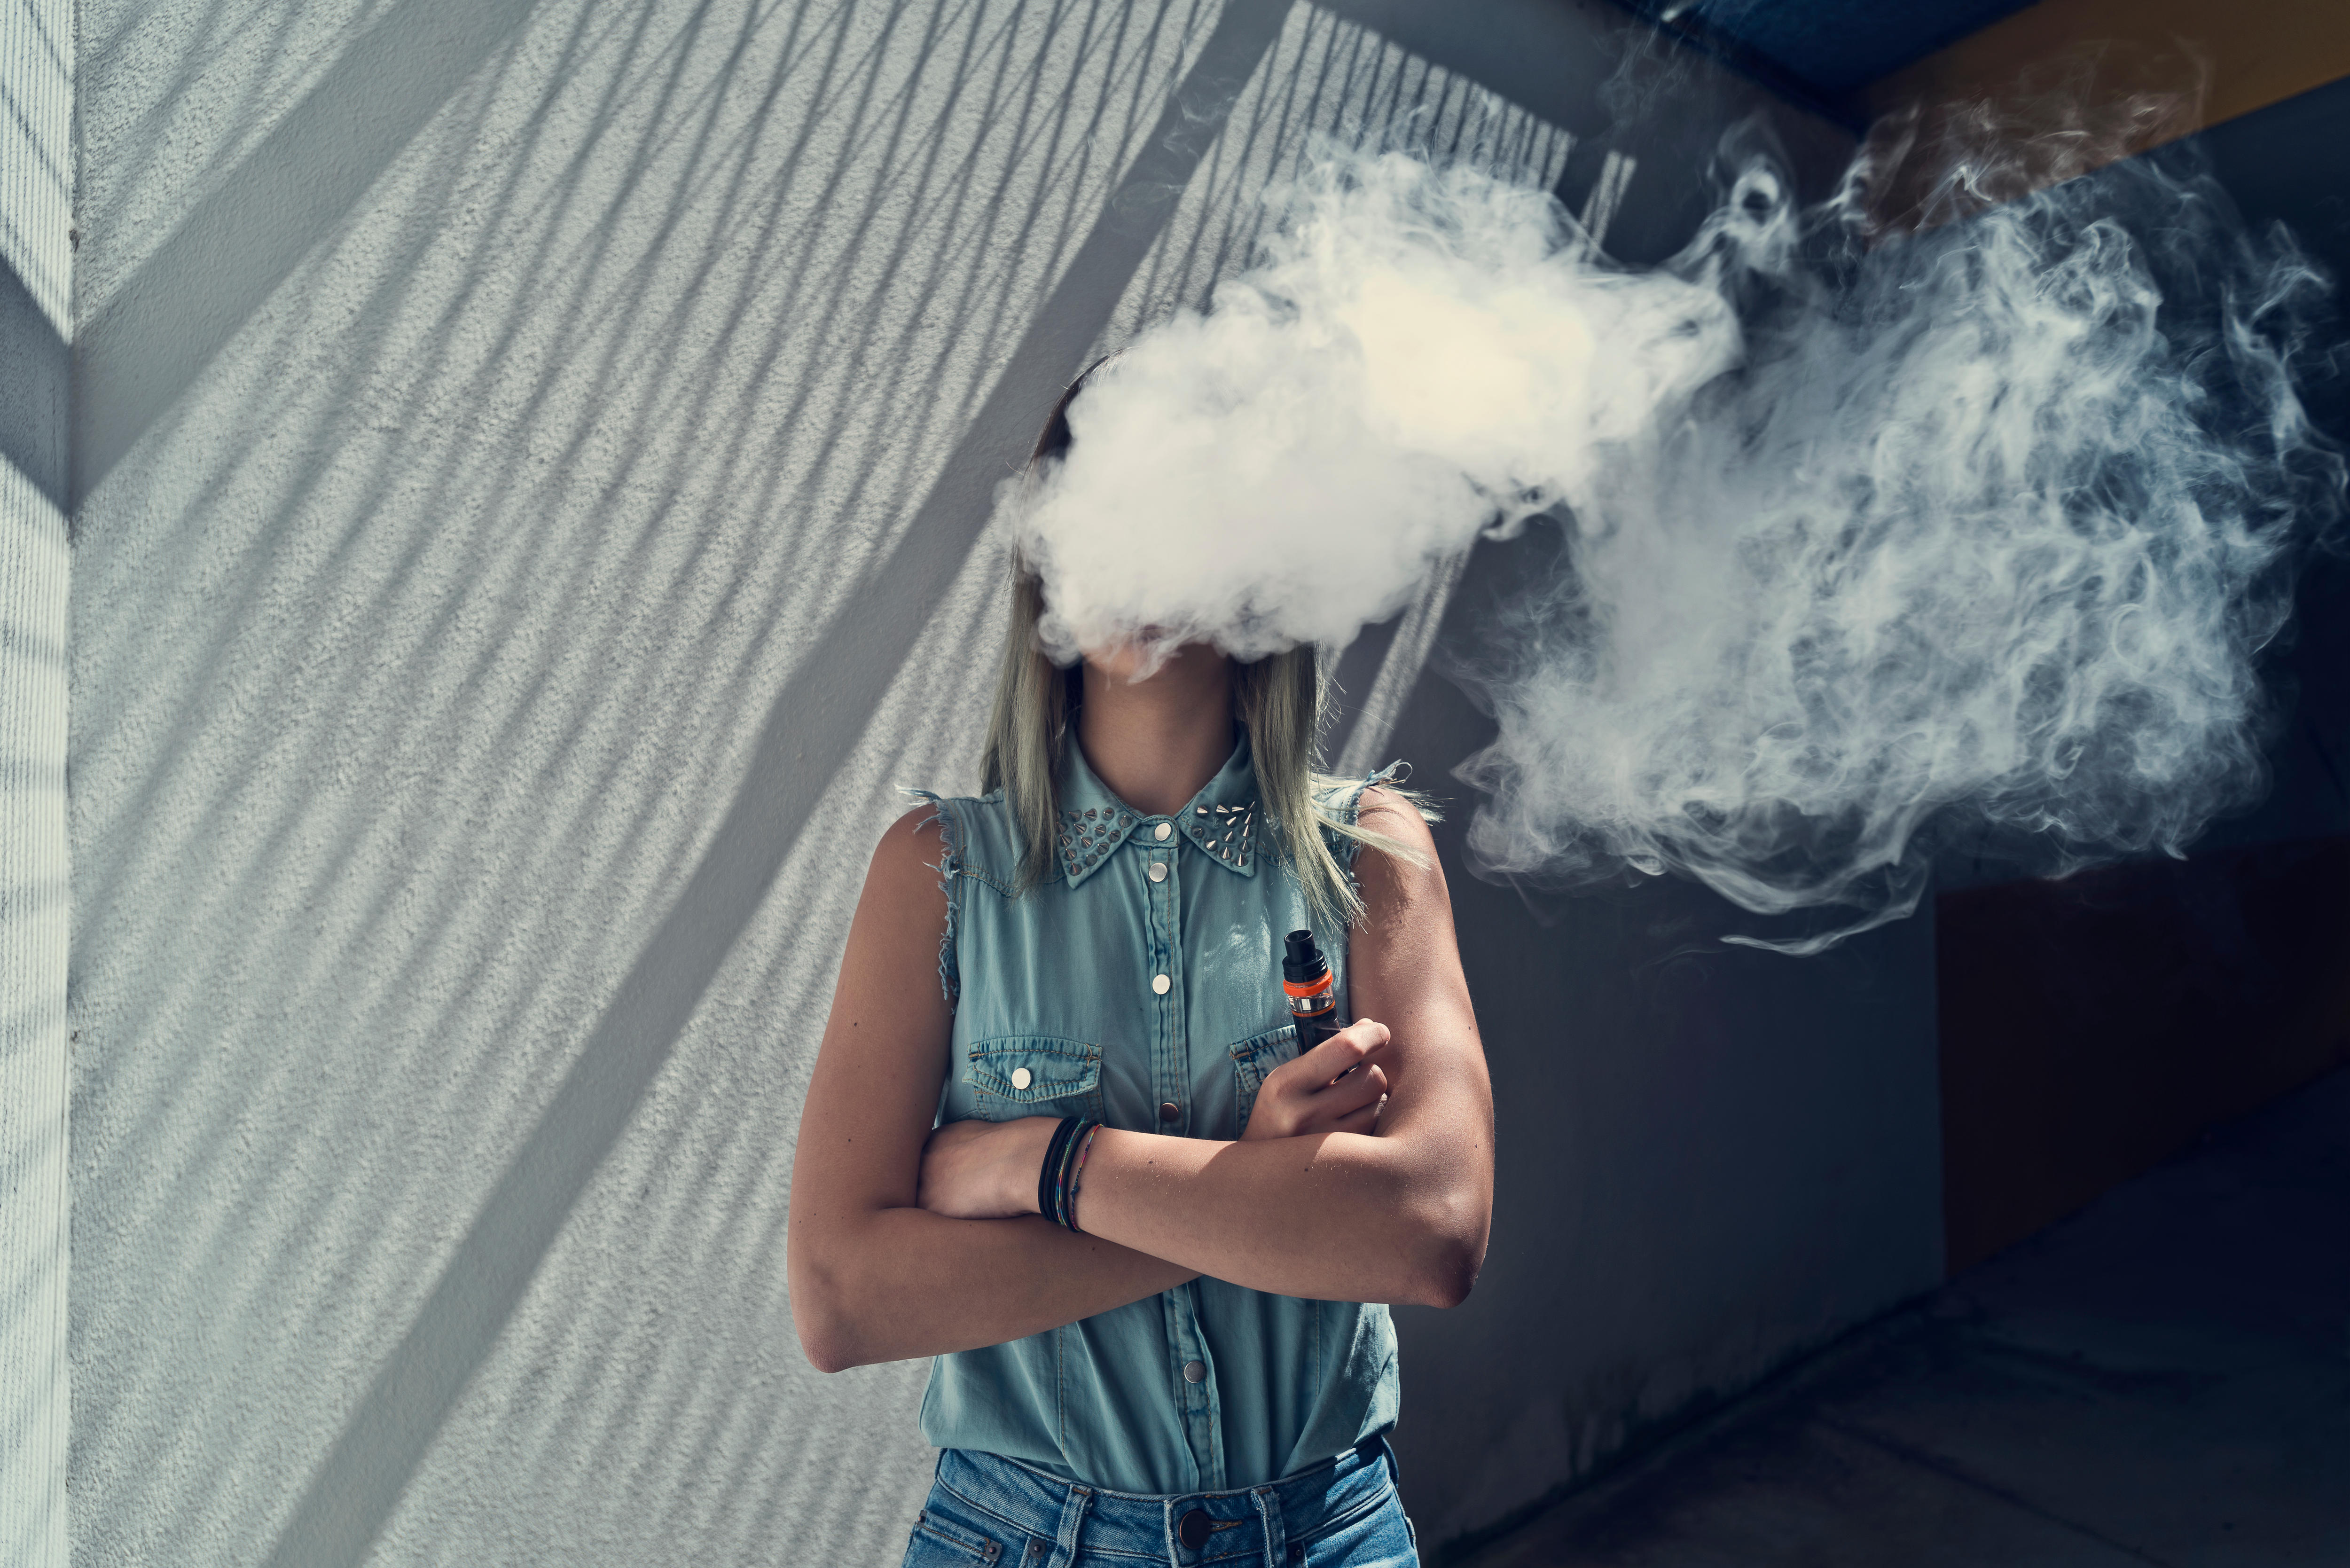 Puffed out: The Costs of Vaping